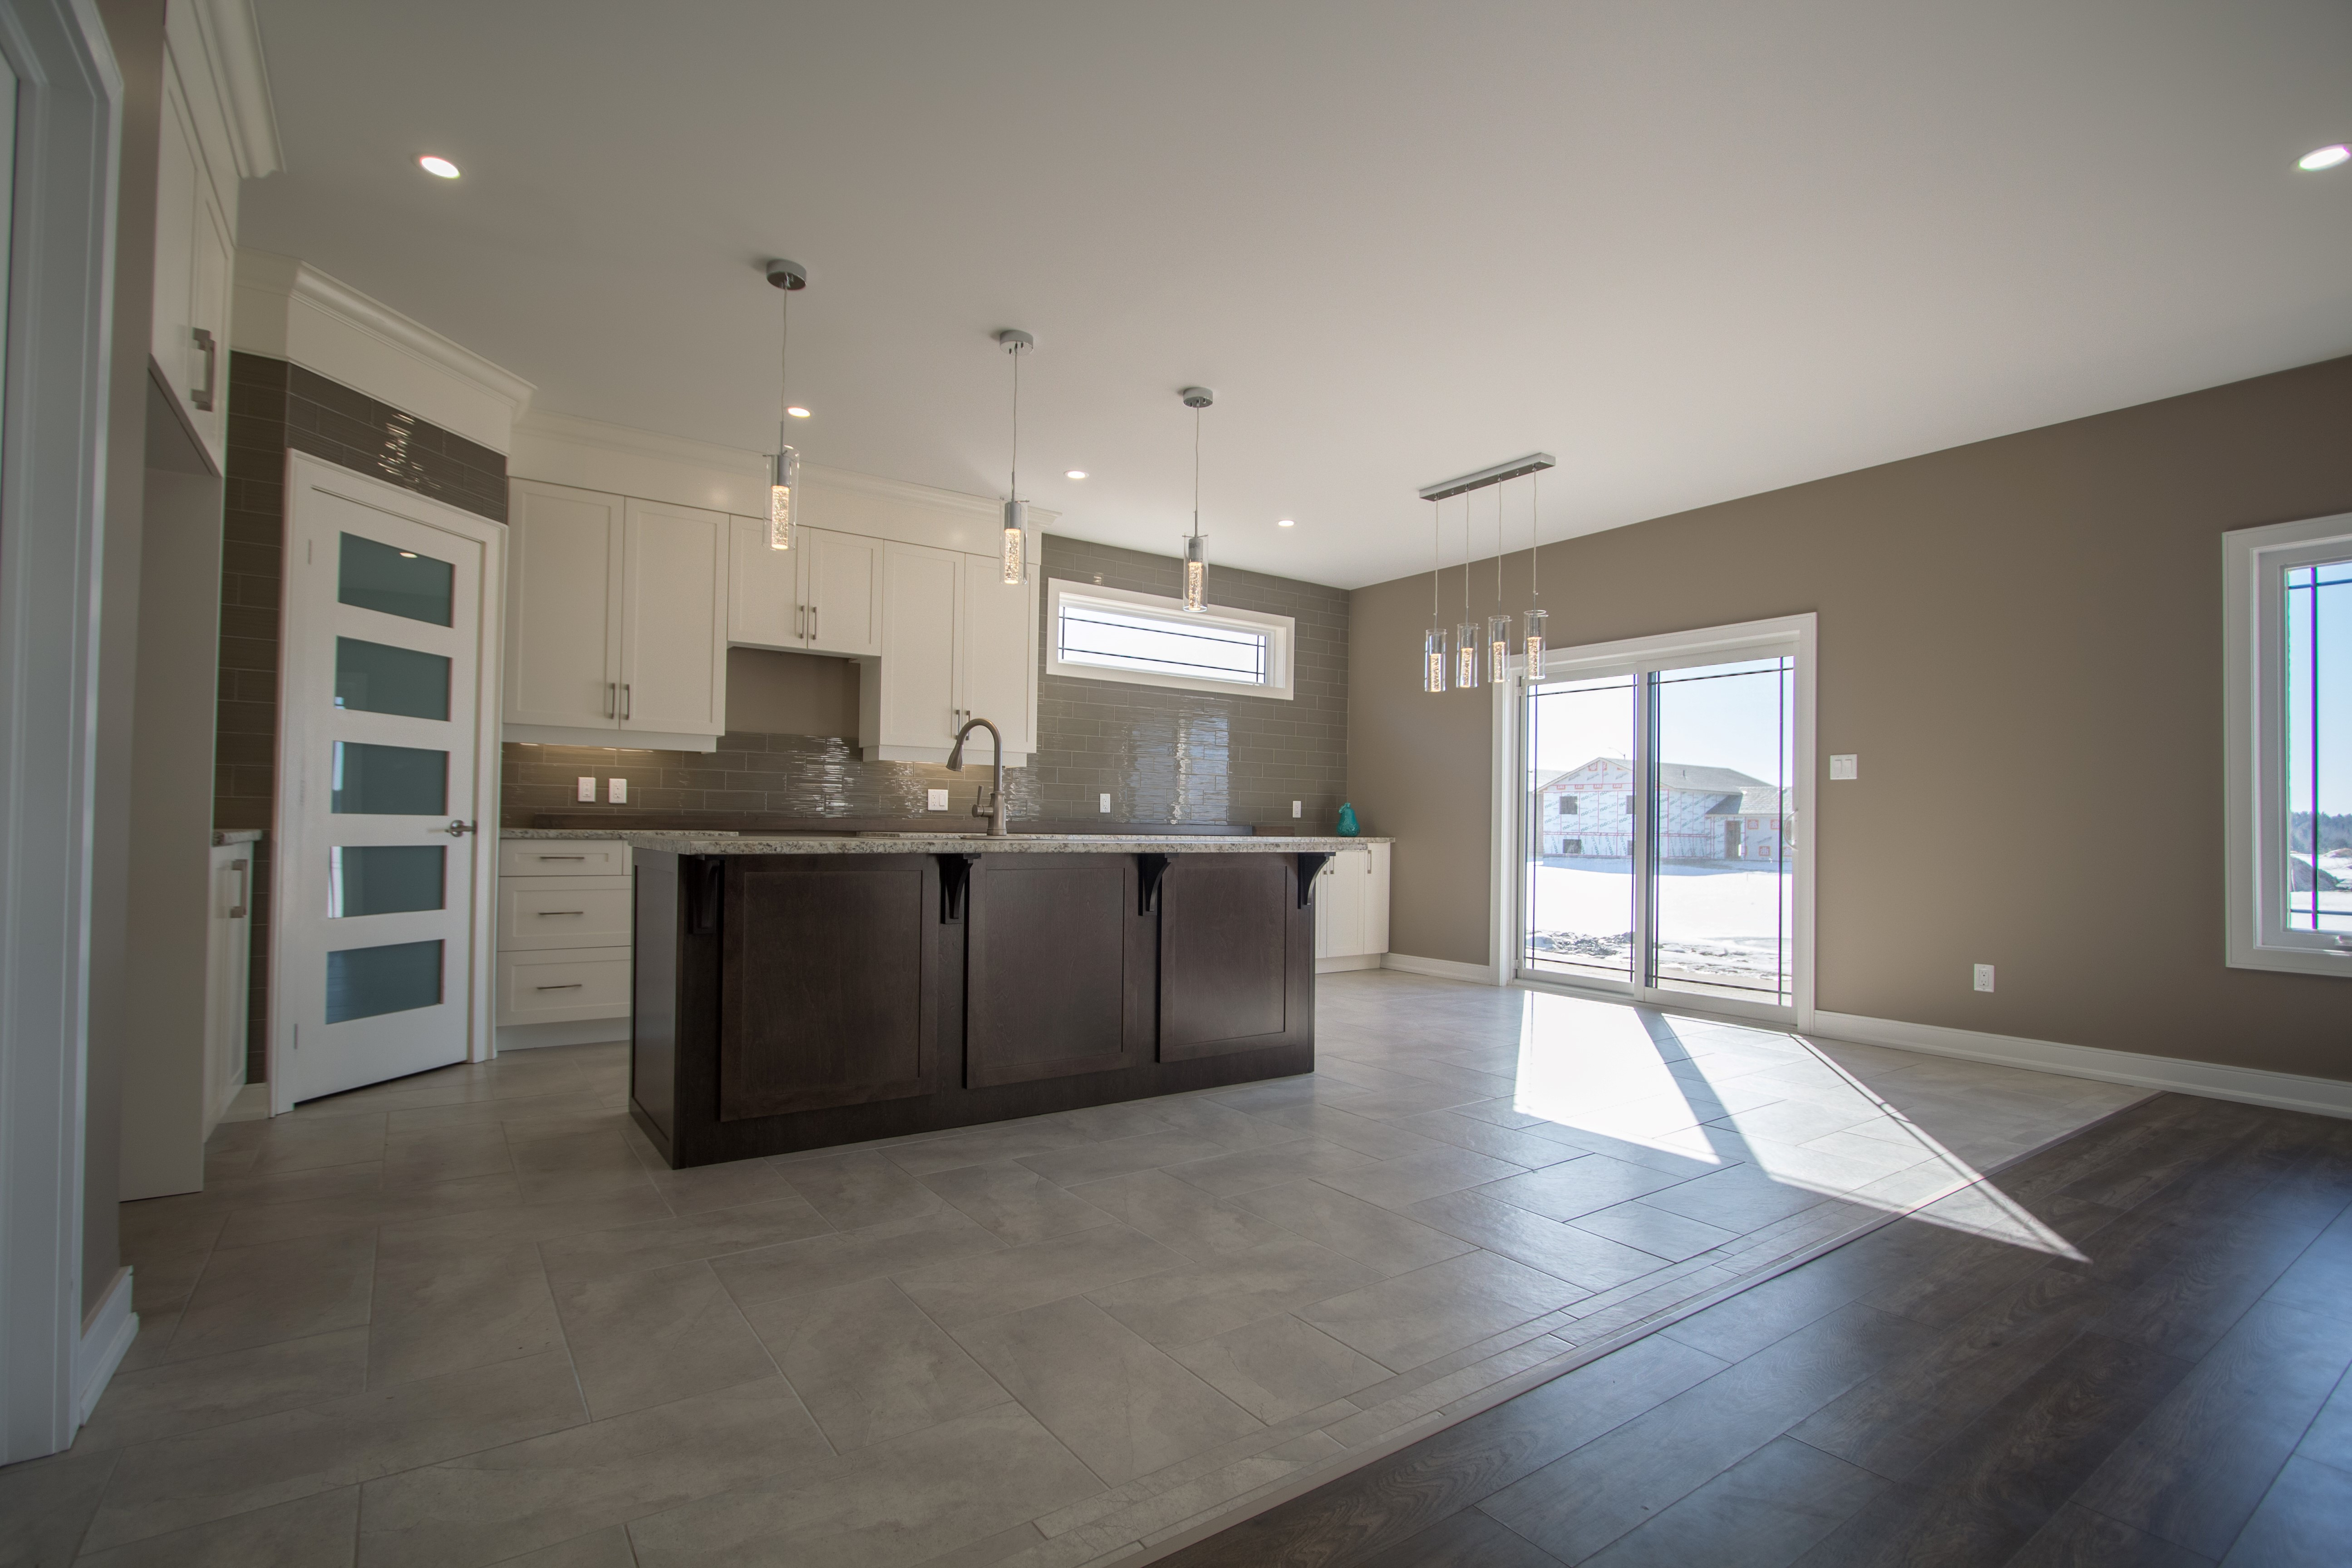 trillium hardwood flooring canada of tri rom homes inc exit ottawa valley realty in more documentation